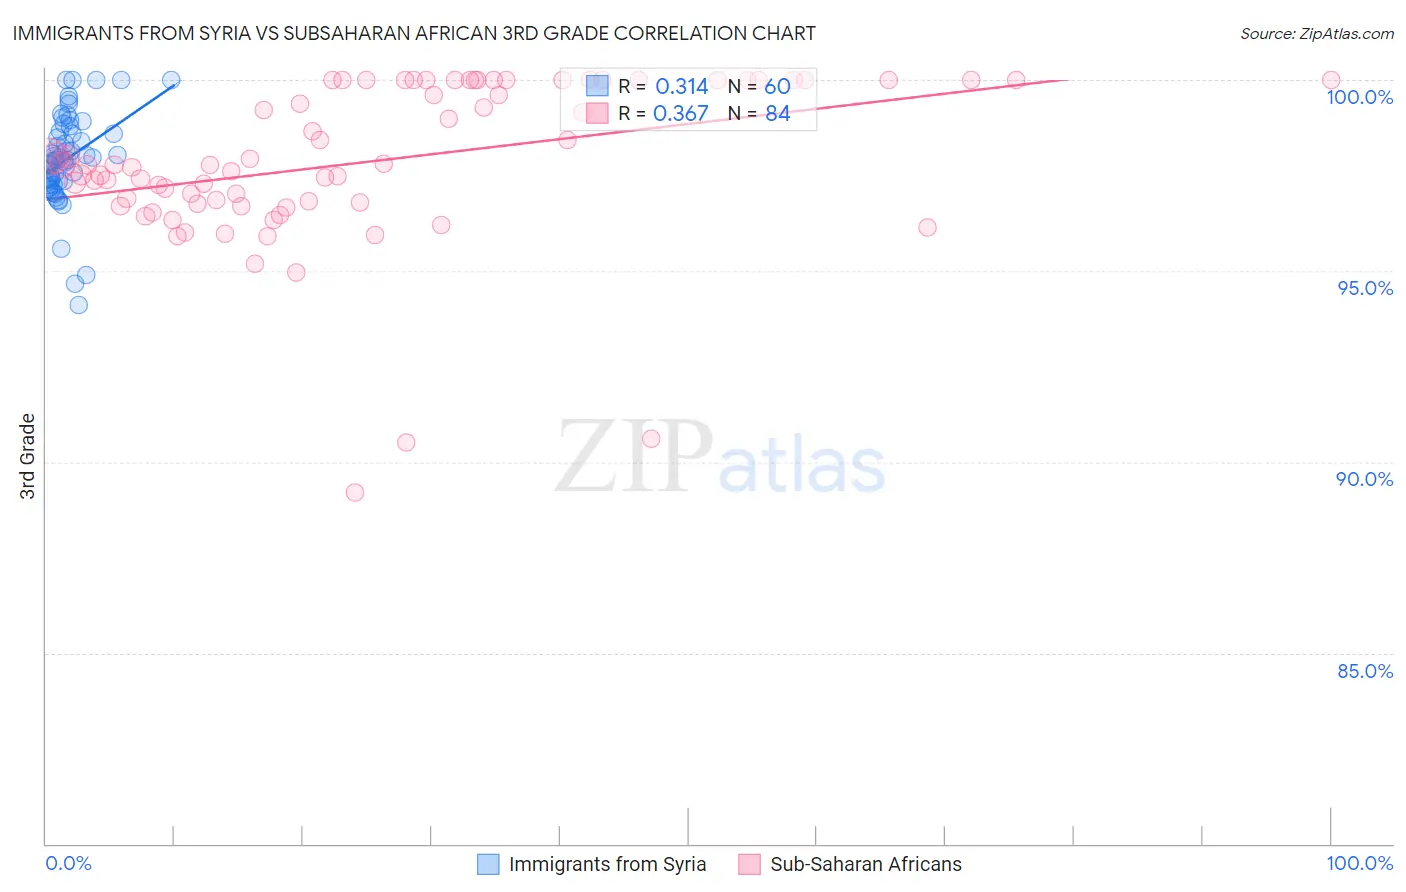 Immigrants from Syria vs Subsaharan African 3rd Grade